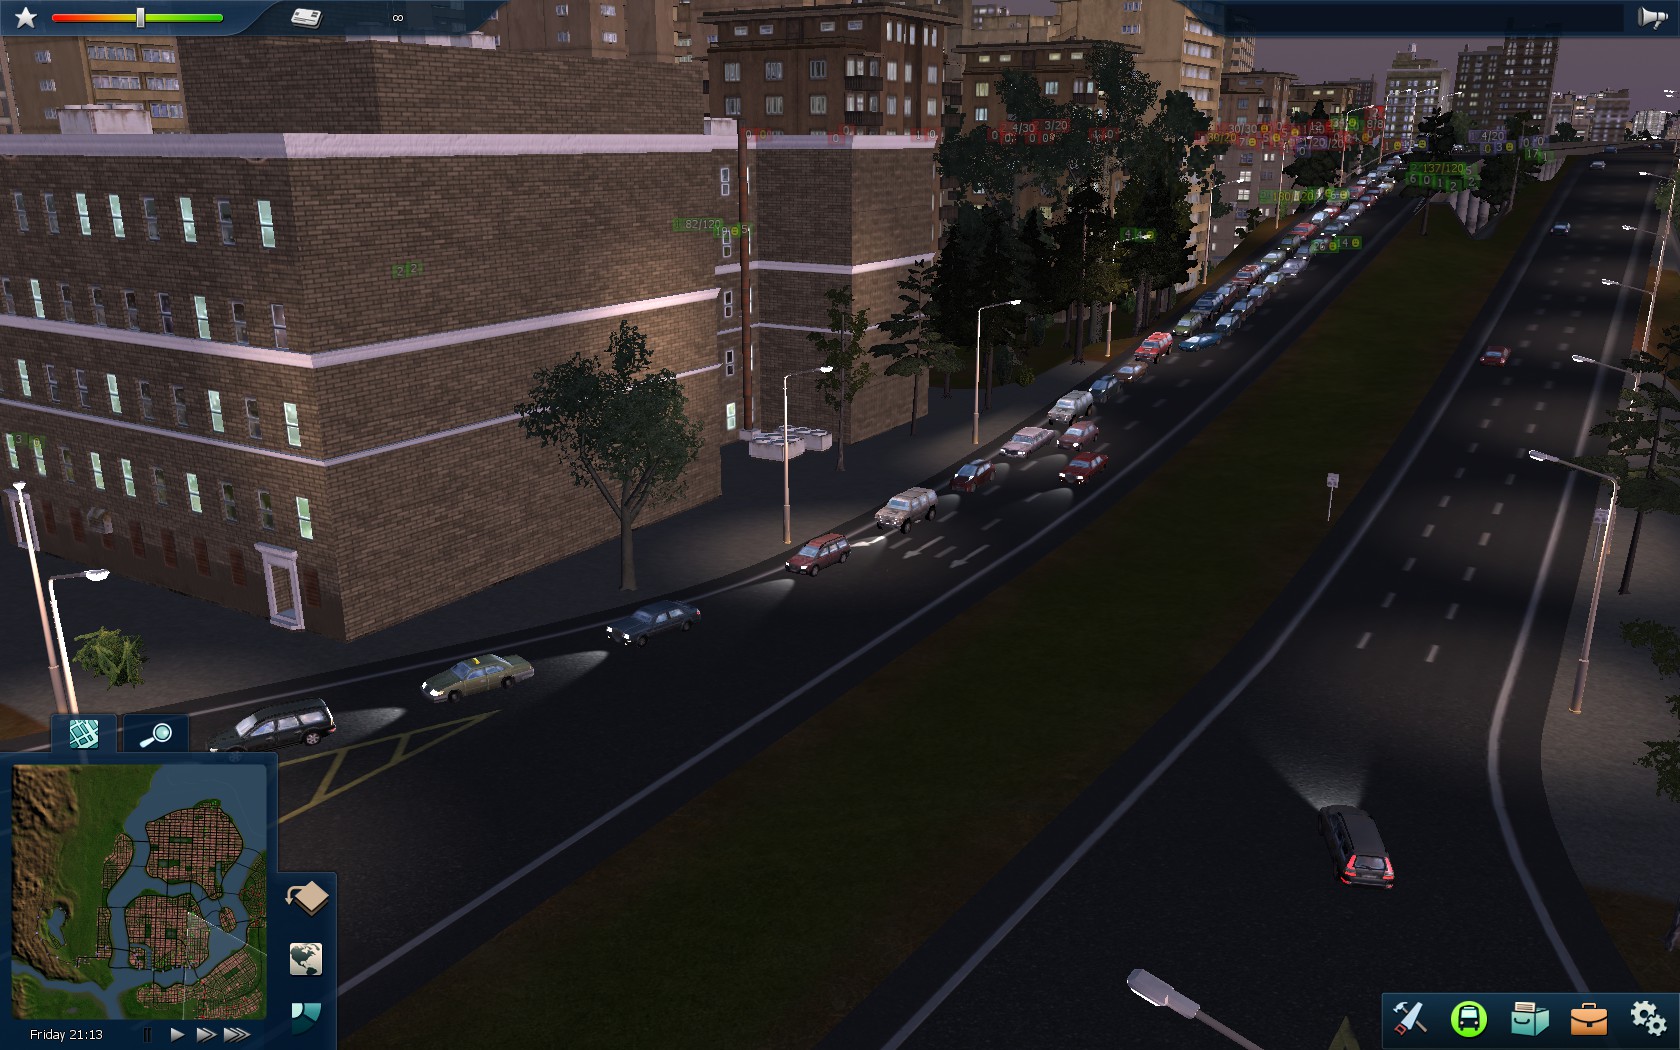 cities motion 2 download free